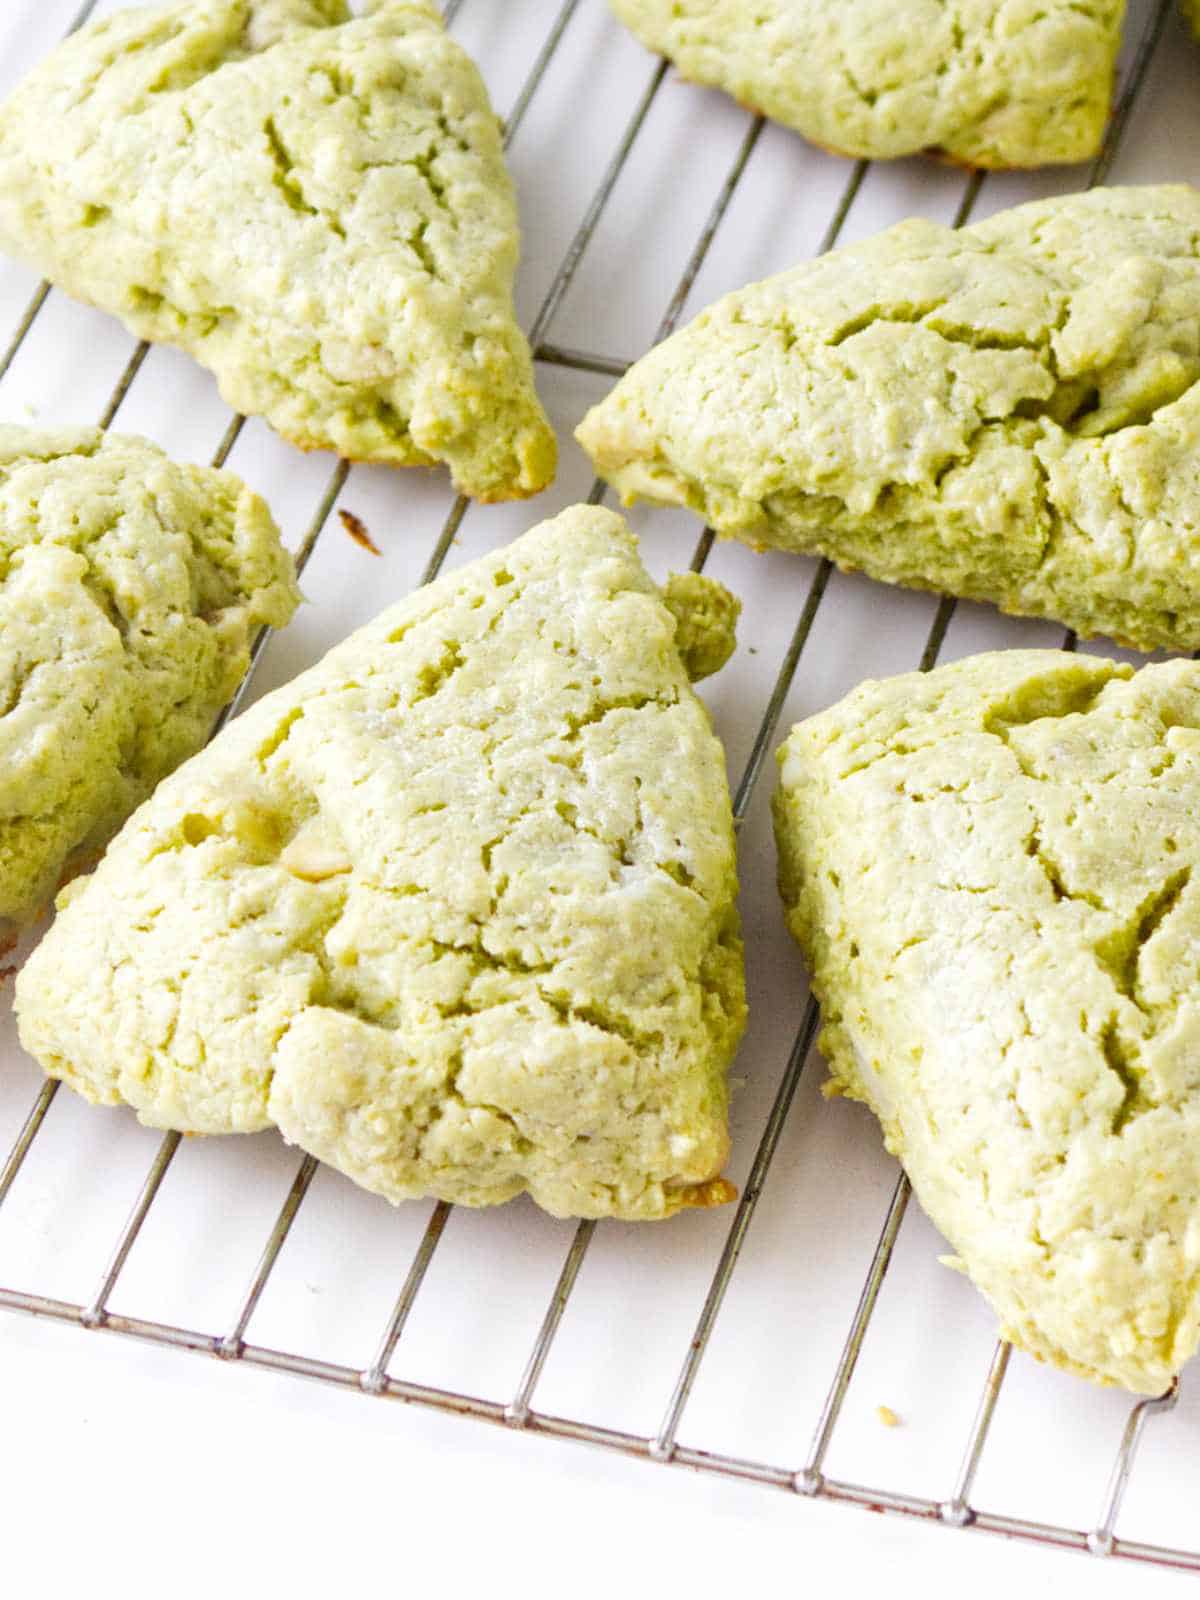 Green Tea Matcha Scones cooling on a wire rack.